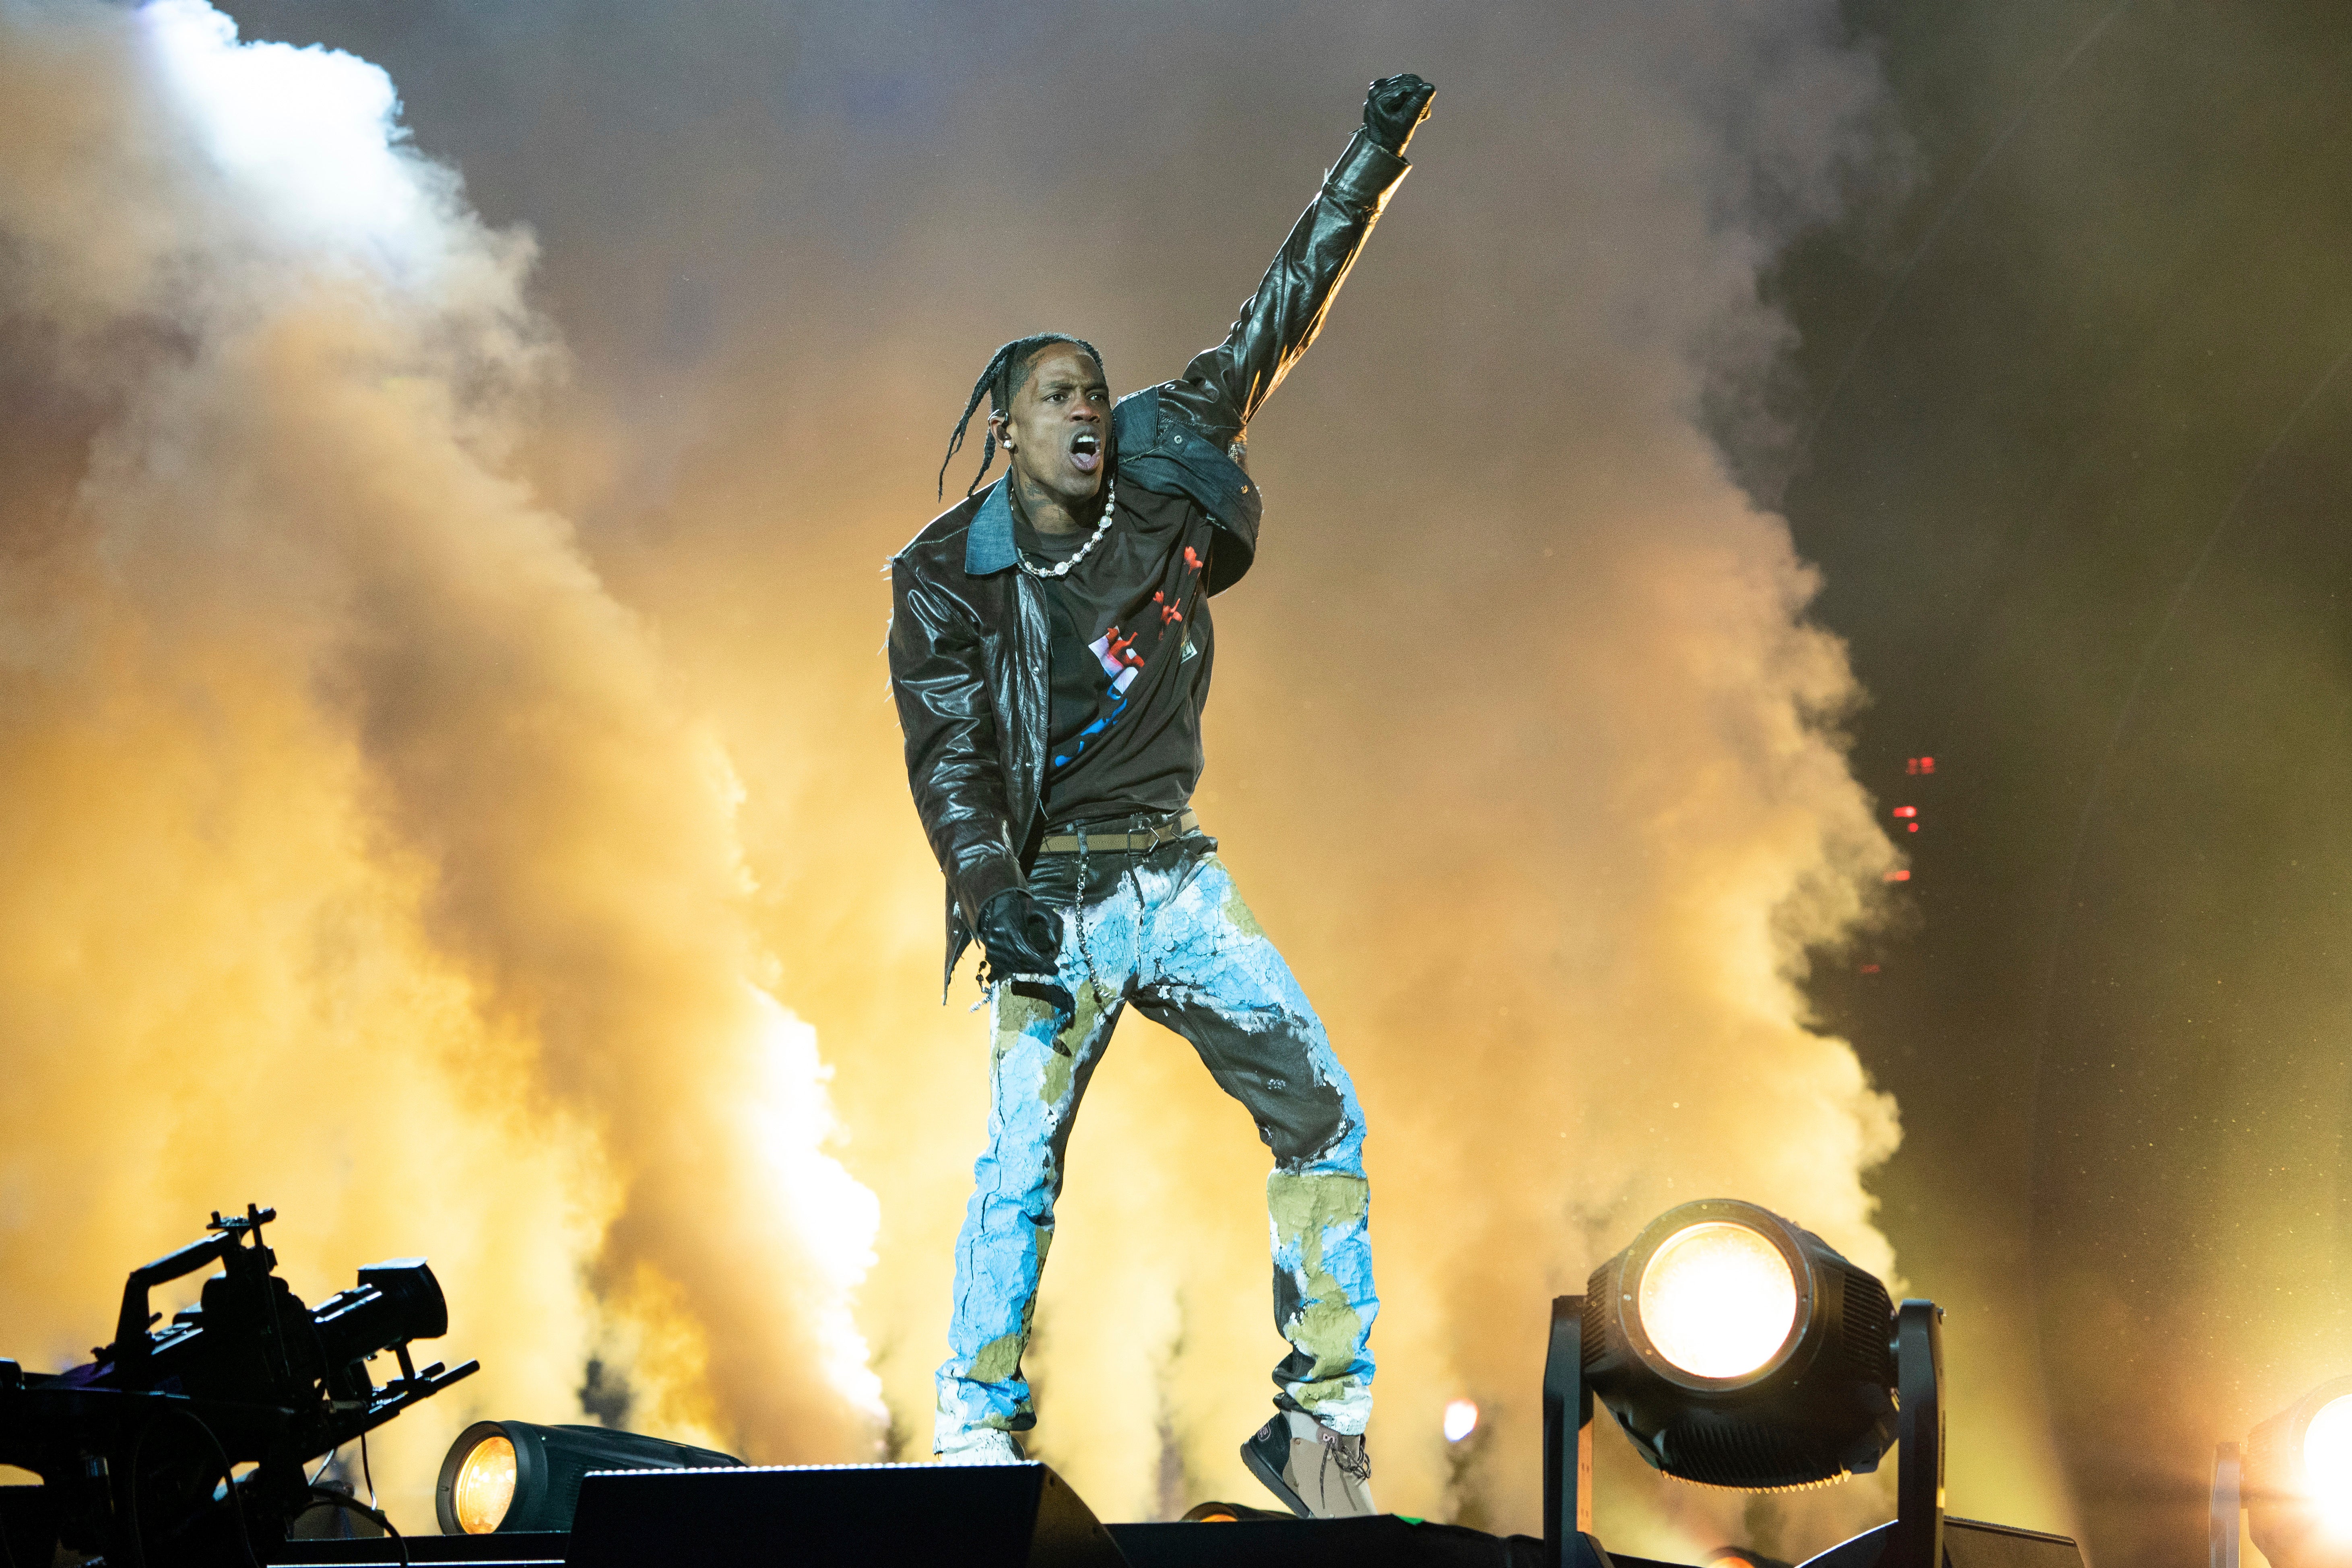 Travis Scott says that pyrotechnics and other paraphernalia onstage prevented him from being able to see what was unfolding